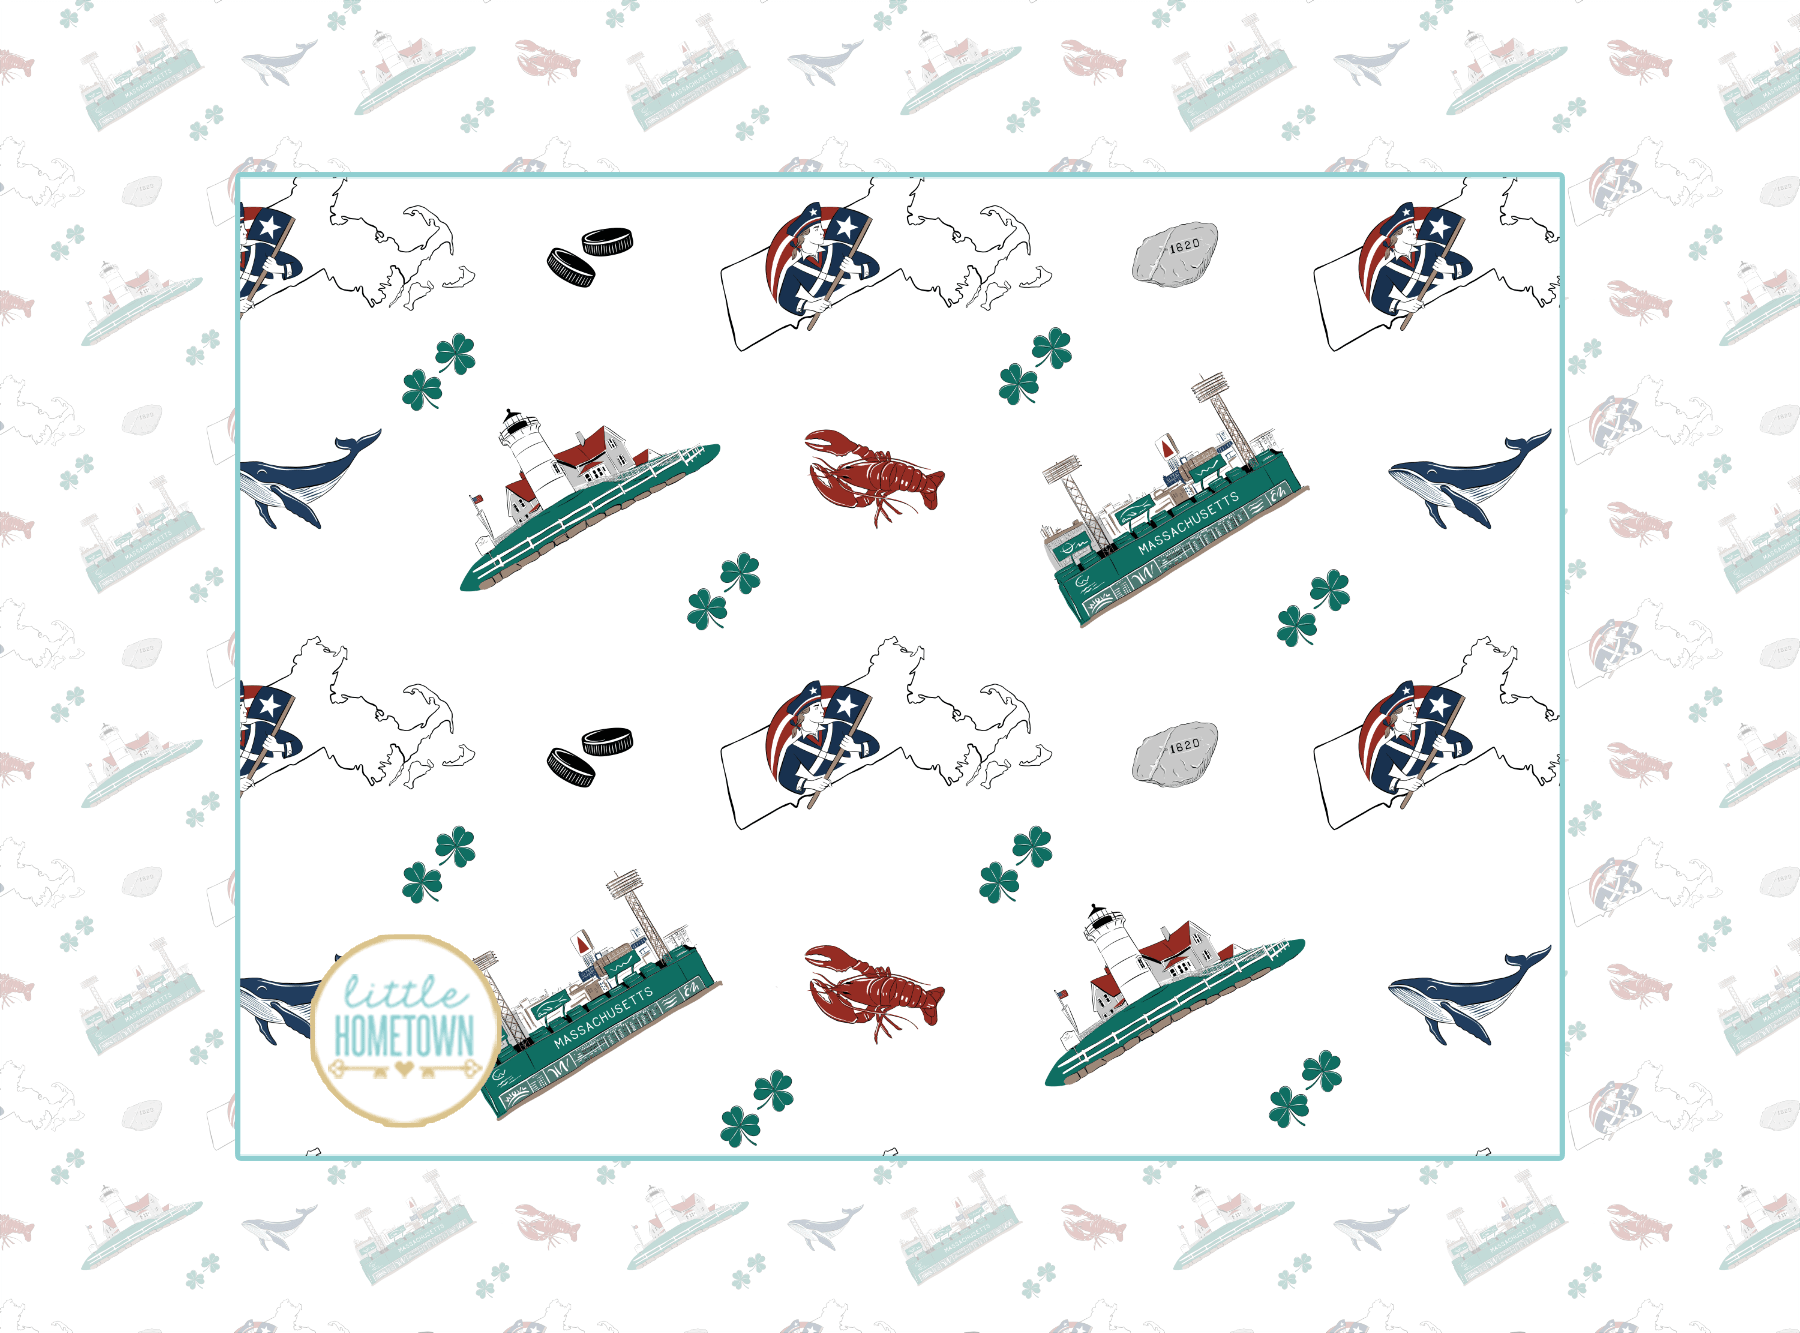 Massachusetts-themed design by Little Hometown showing all of the items on the swaddle.  Including Plymouth Rock, A whale, Shamrocks, Nobska Lighthouse in Falmouth, lobsters, hockey pucks, and the Green Monster